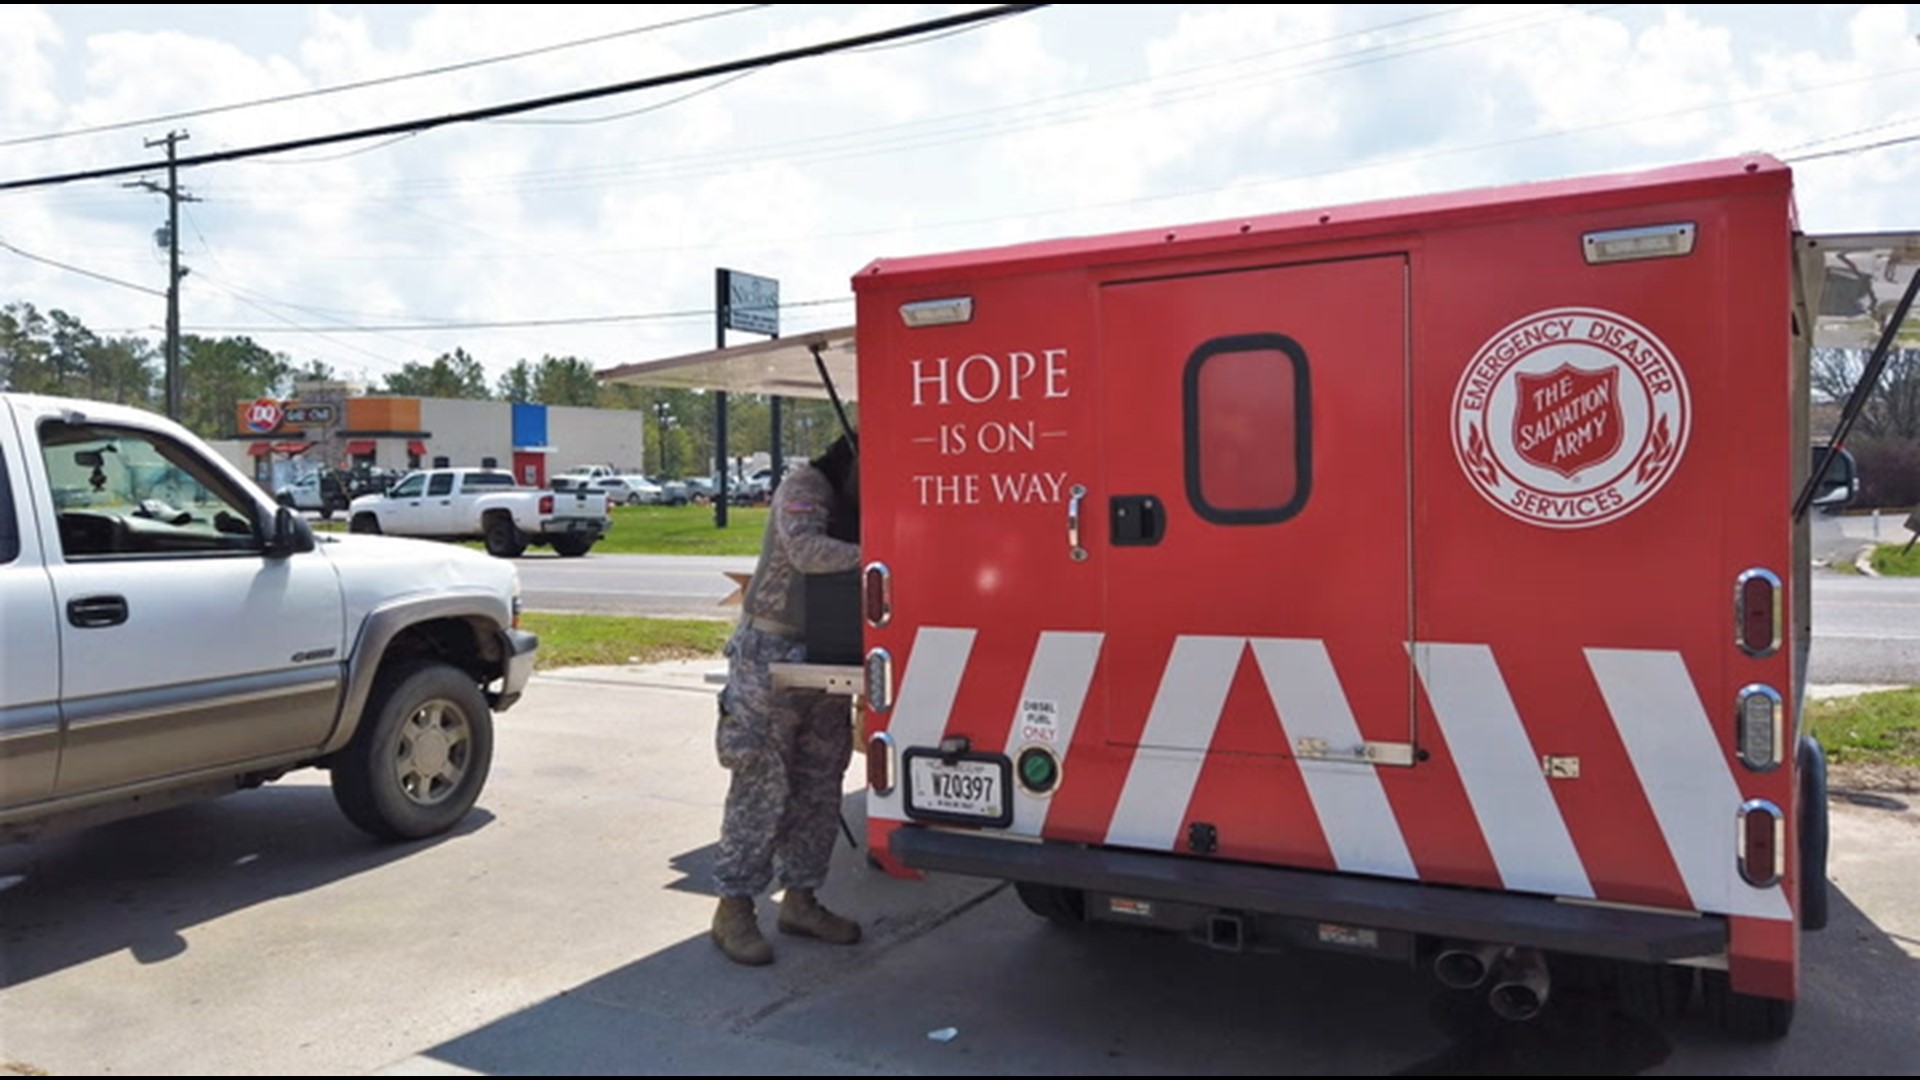 The Salvation Army had been in place in Pensacola, Florida, in the days before Sally arrived and is now providing food, water and emotional support.